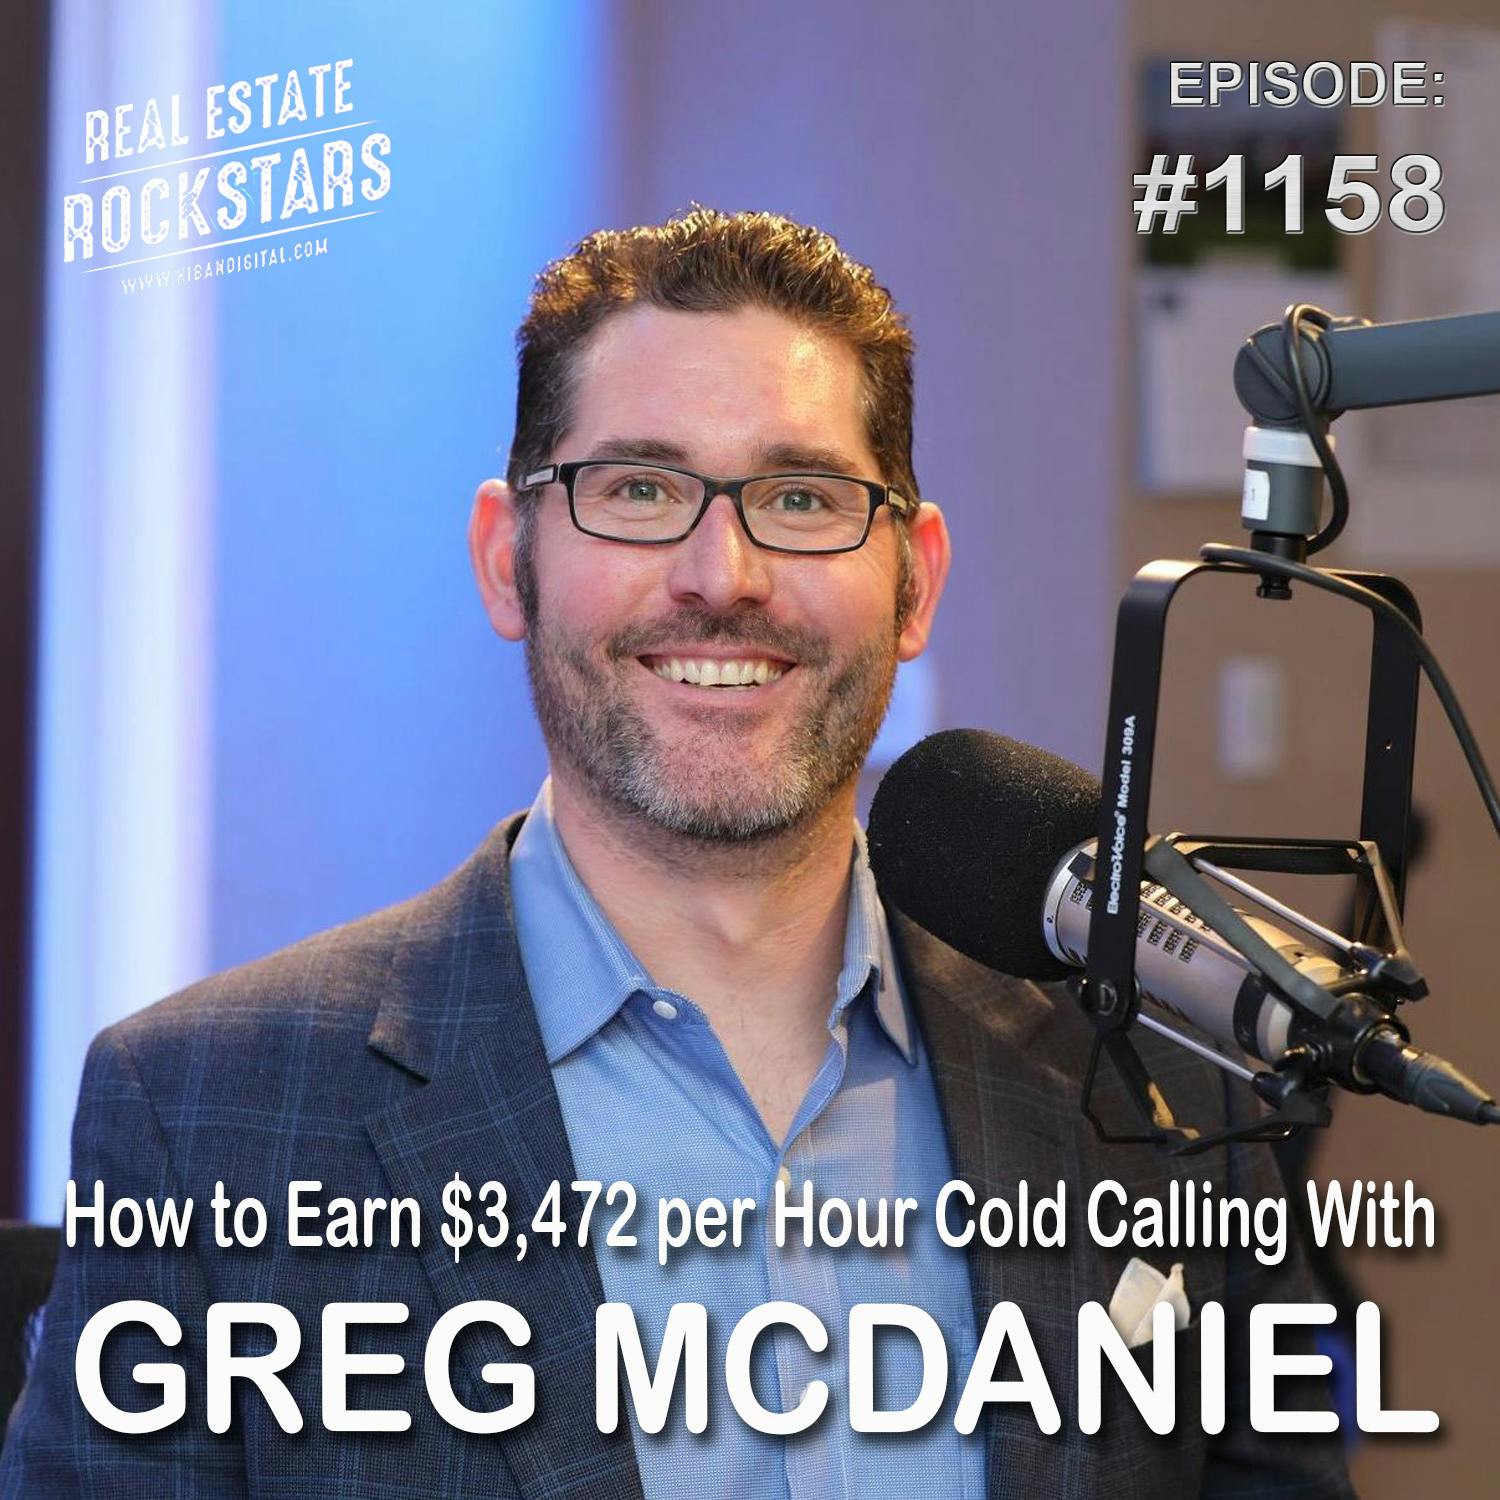 1158: How to Earn $3,472 per Hour Cold Calling With Greg McDaniel